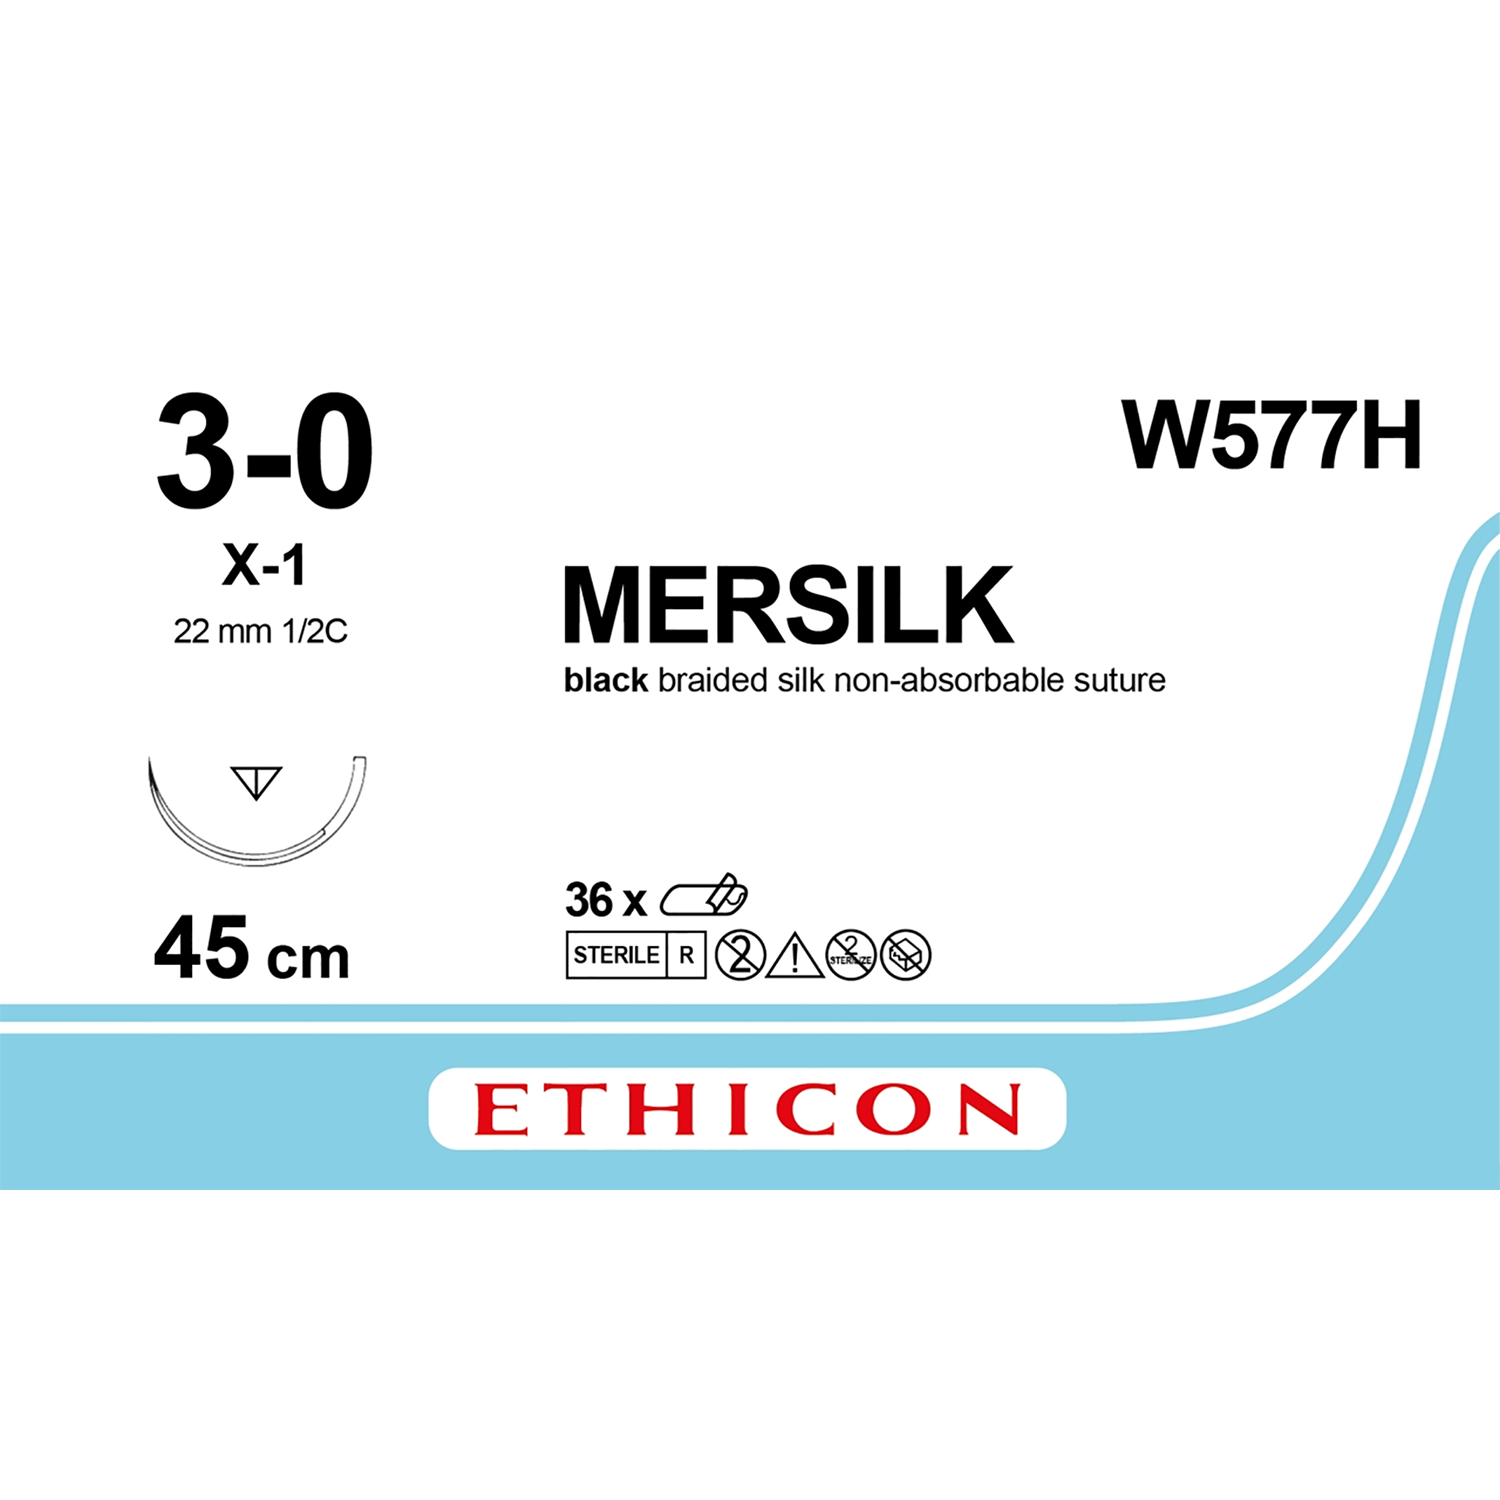 Ethicon Mersilk Suture | Non Absorbable | Black | Size 3-0 | Length: 45cm | Needle: X-1 | Pack of 36